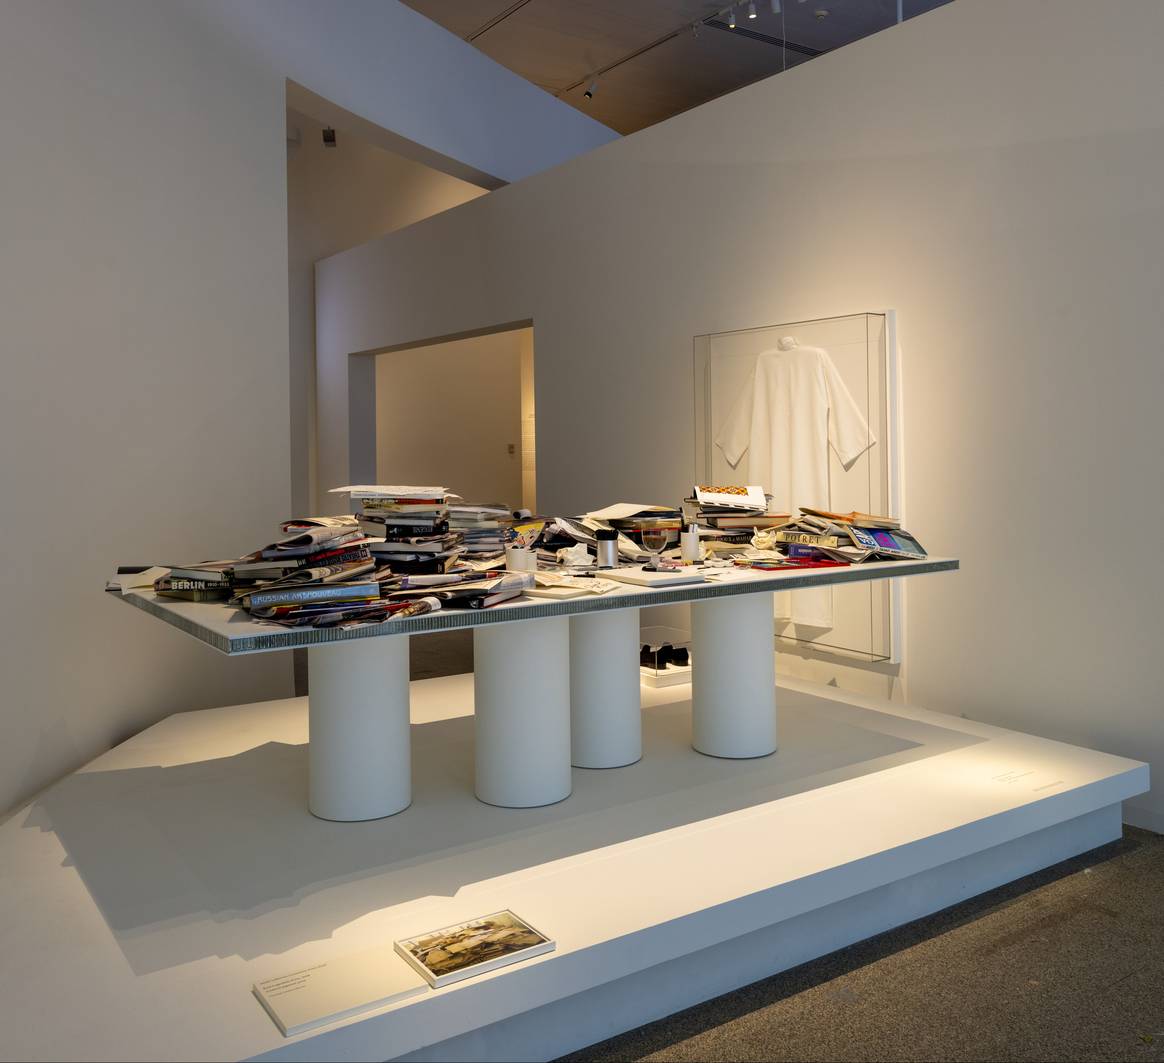 Credits: A recreation of "blanche table" at the "Karl Lagerfeld: A Line of Beauty" exhibition. Courtesy of the Metropolitan Museum of Art.